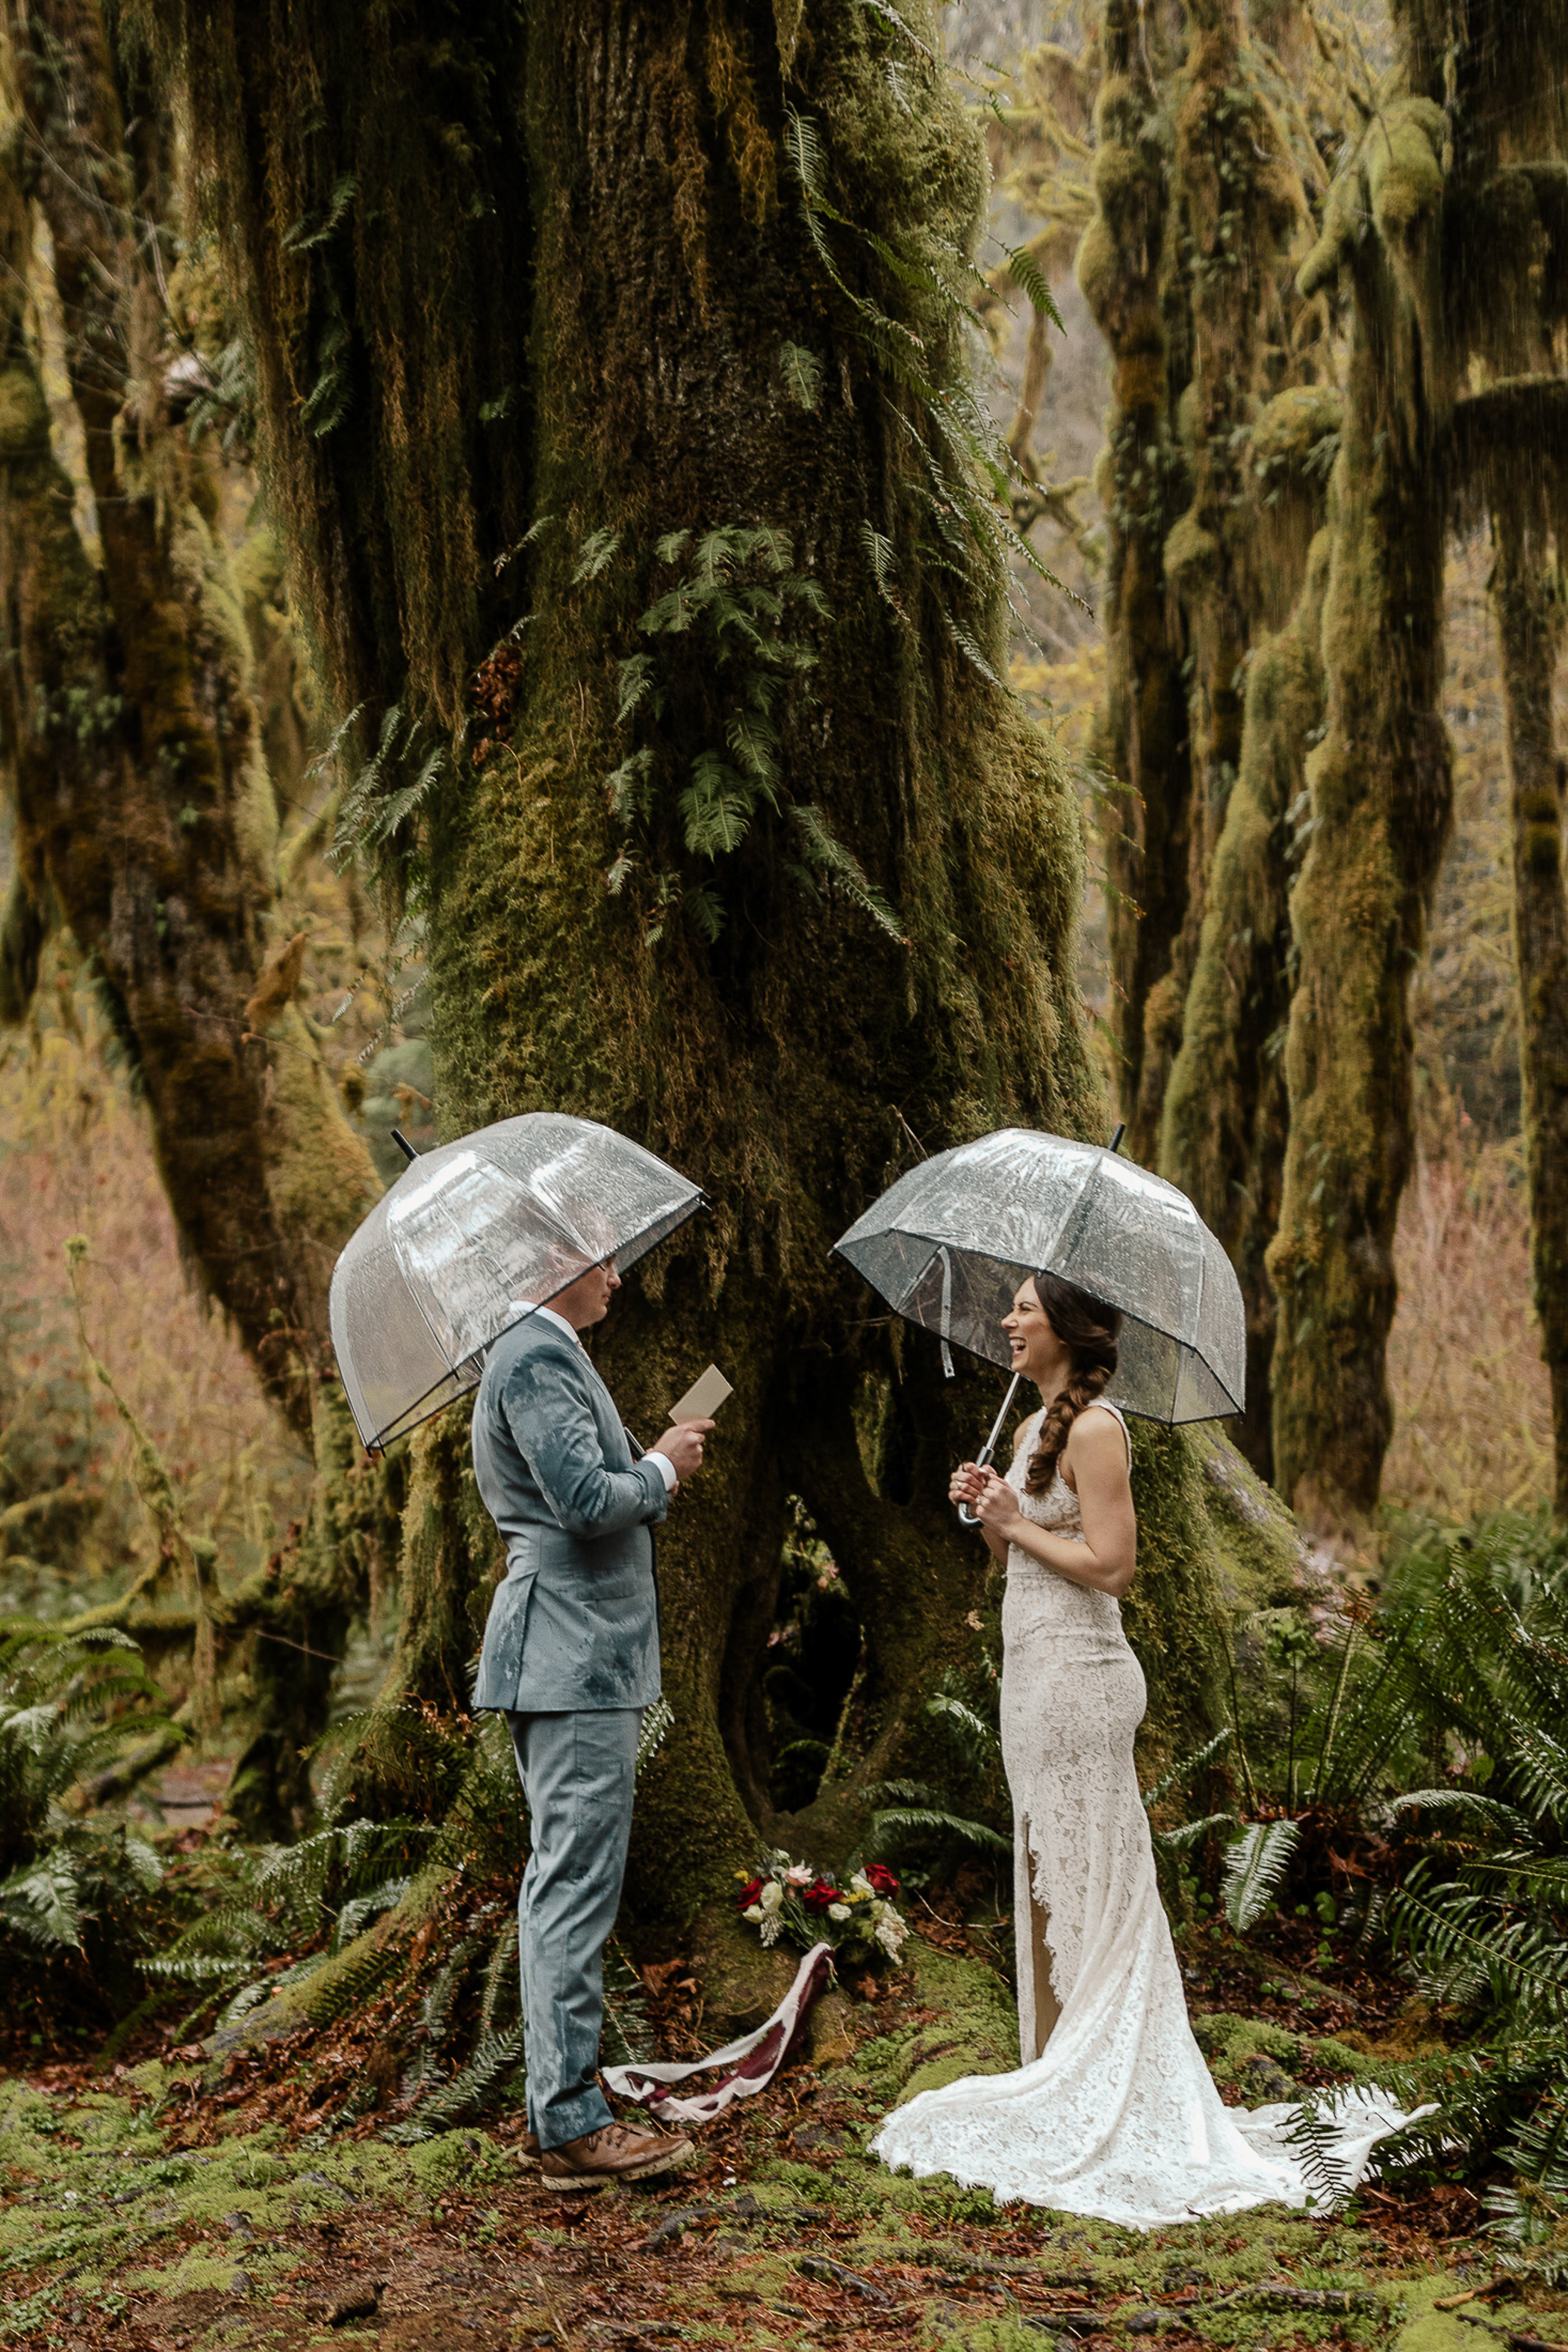 Bride and groom saying vows in a rainforest